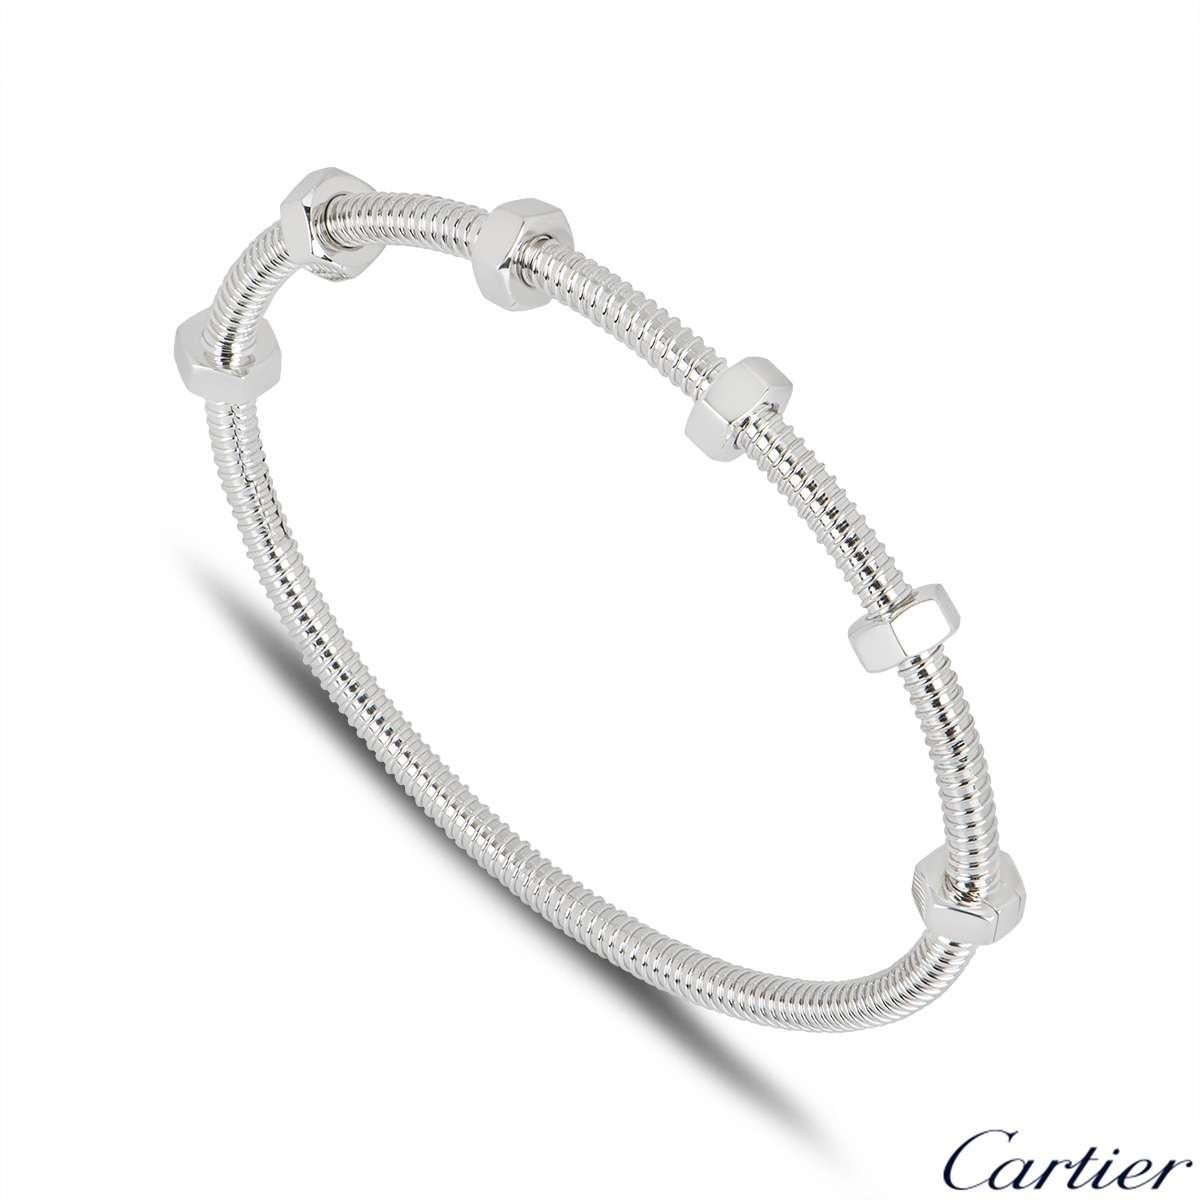 A stunning 18k white gold bracelet by Cartier from the Ecrou De Cartier collection. The bracelet has a threaded design which features 6 bolts with 4 swivelling freely along one side of the bracelet. The bracelet is a size 16 and has a gross weight